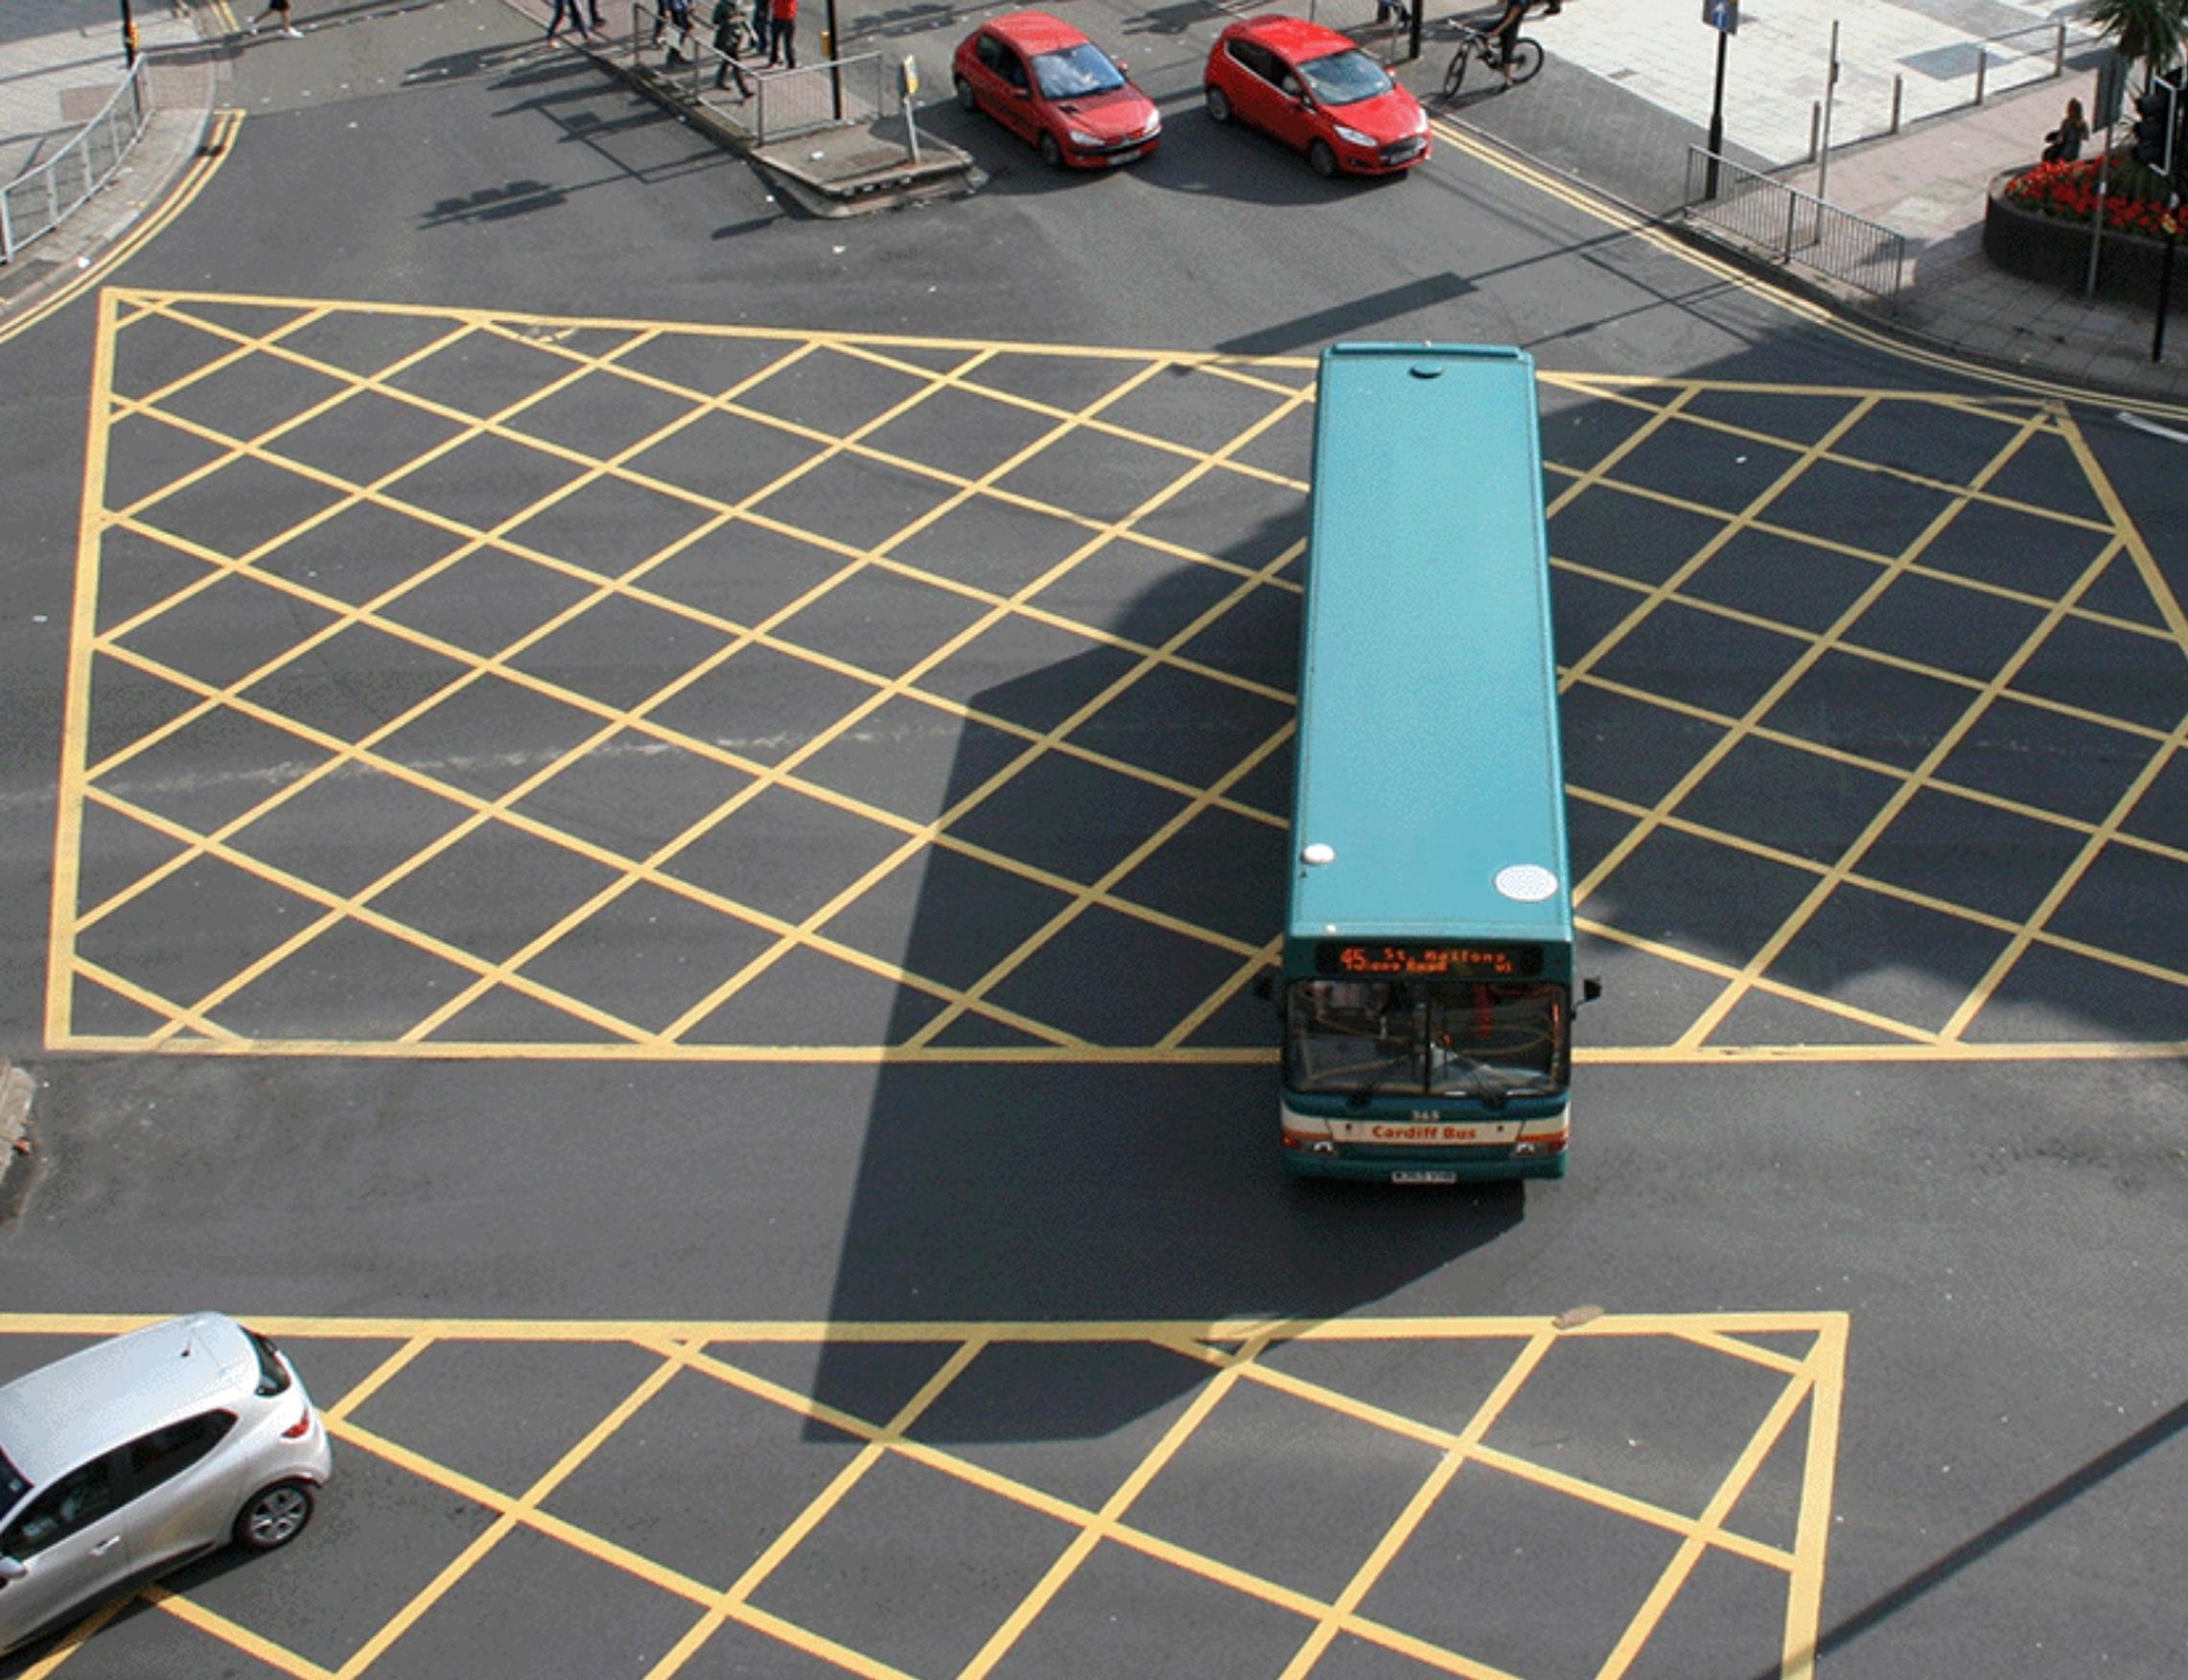 98% of yellow box junctions ‘too big’ says RAC